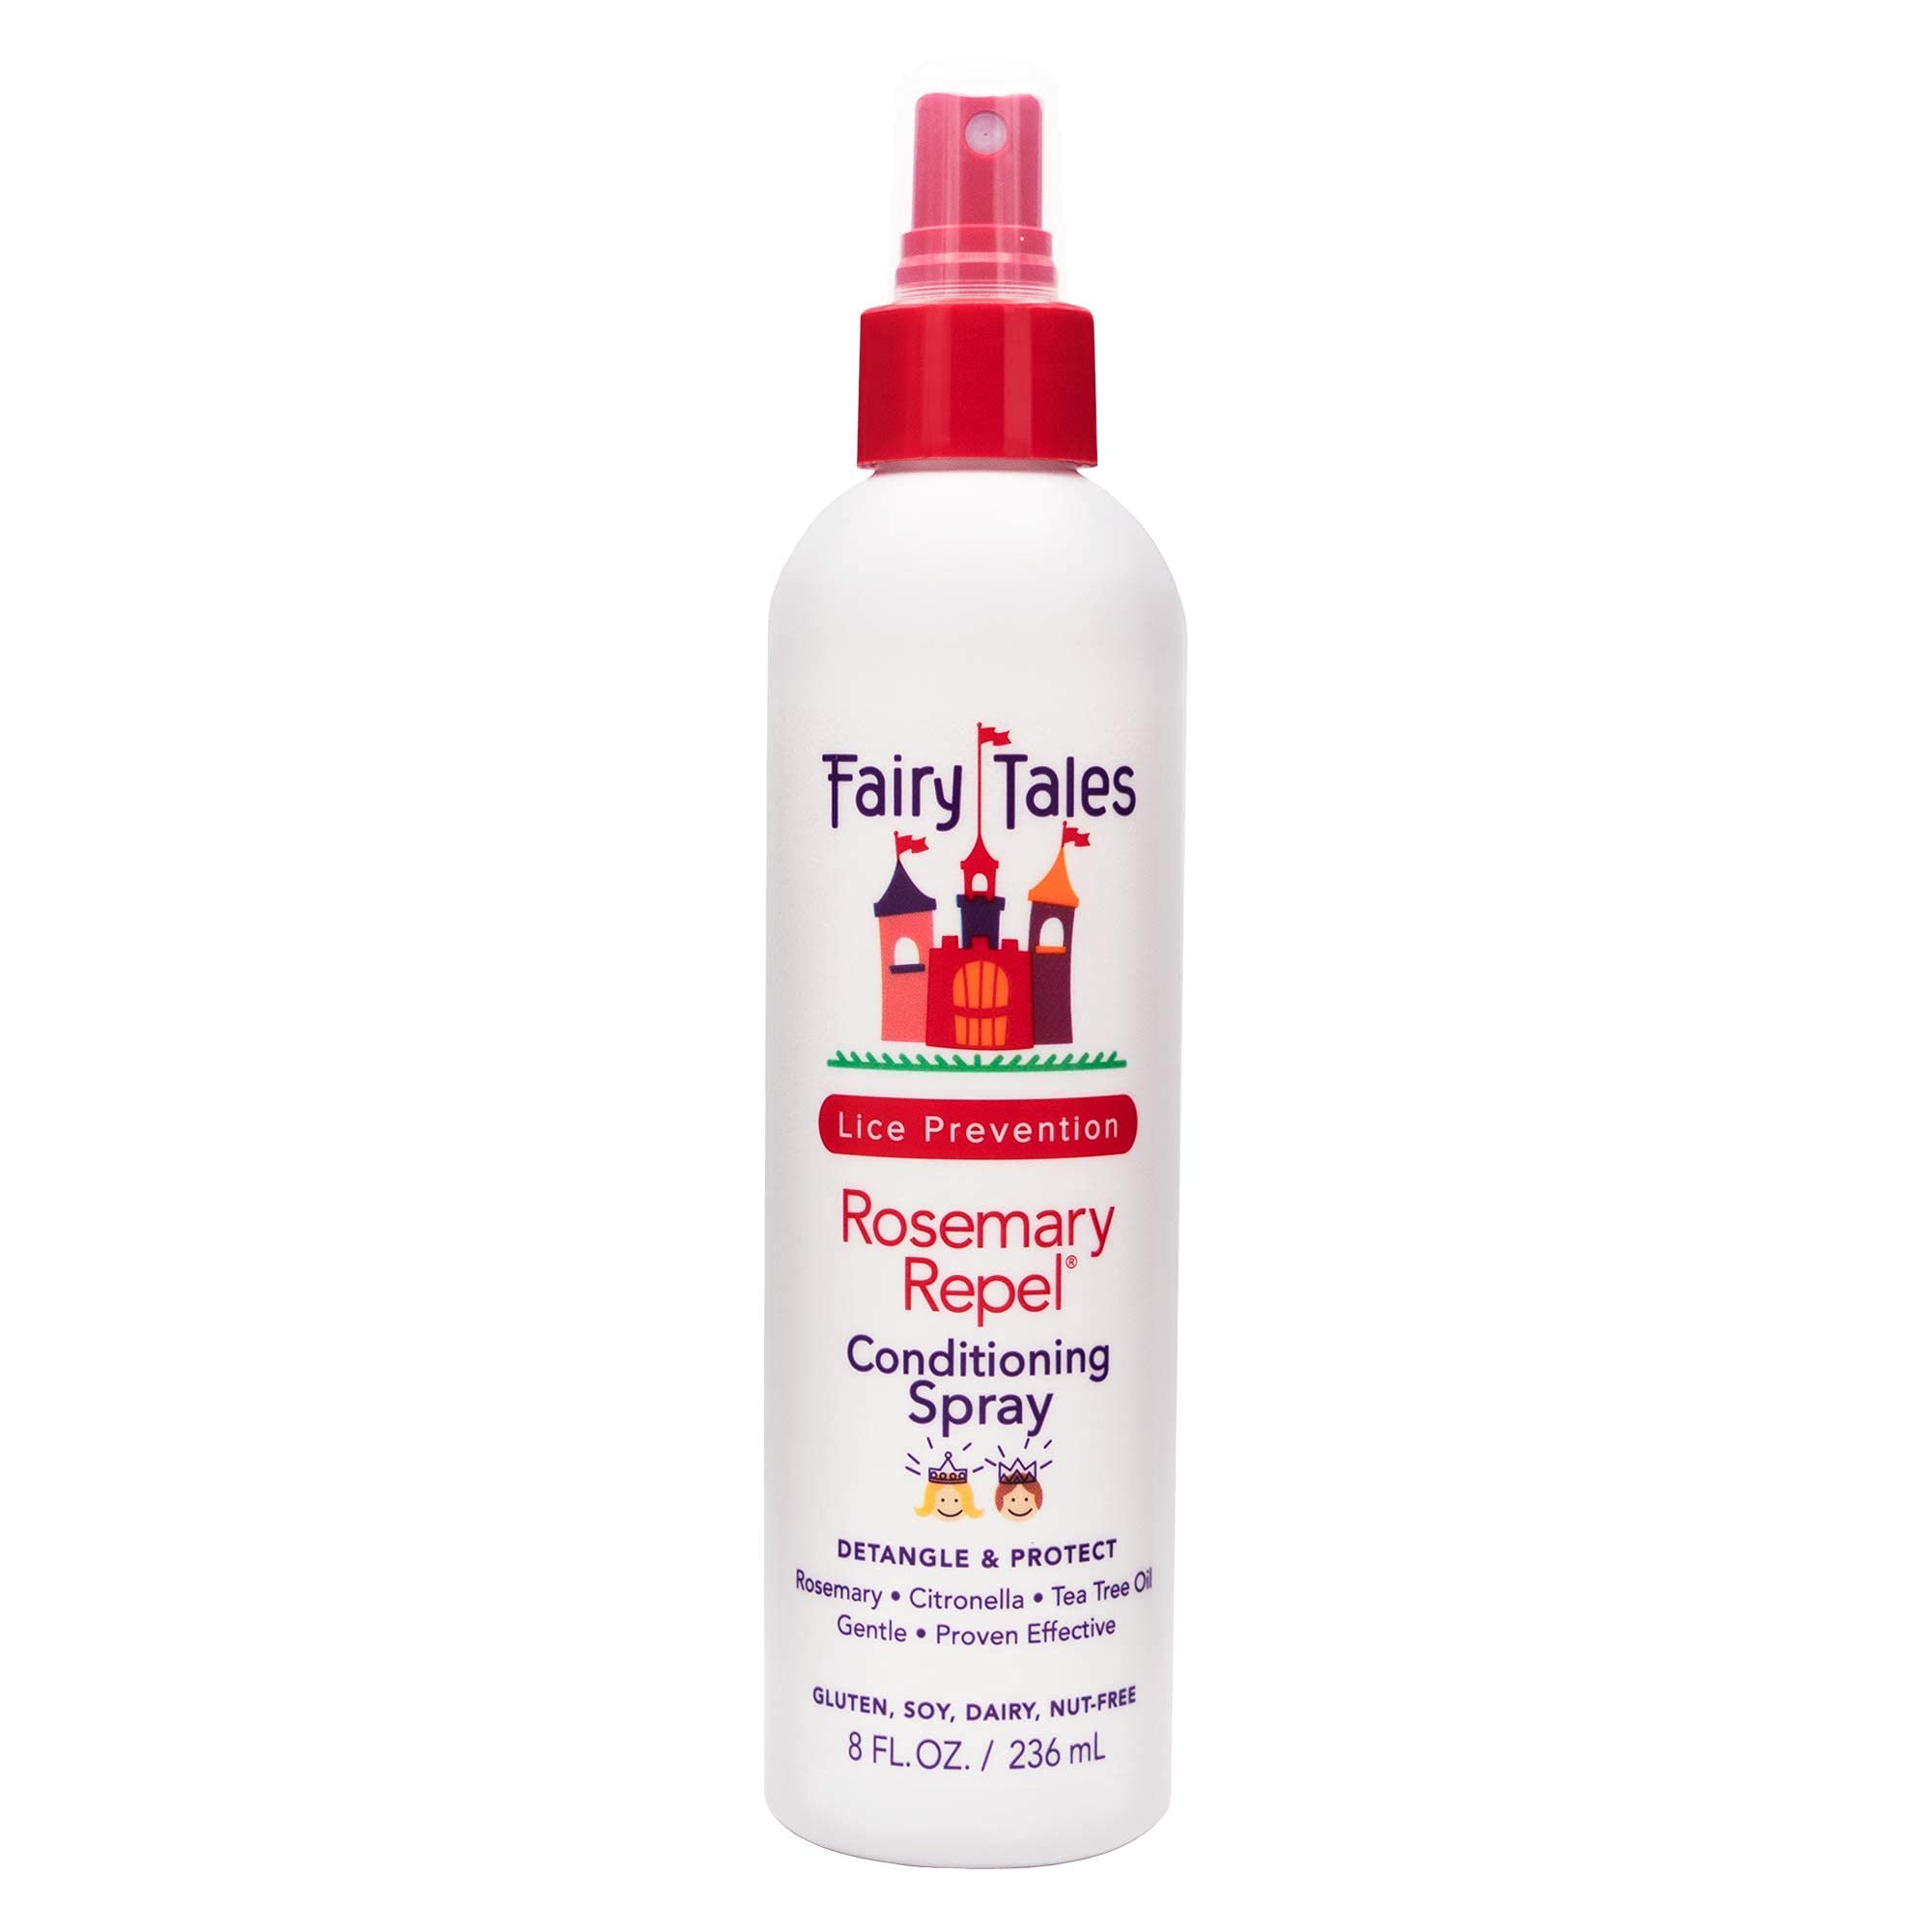 Fairy Tales Rosemary Repel Daily Kid Conditioning Spray for Lice Prevention, 8 Fl. Oz (Pack of 1)